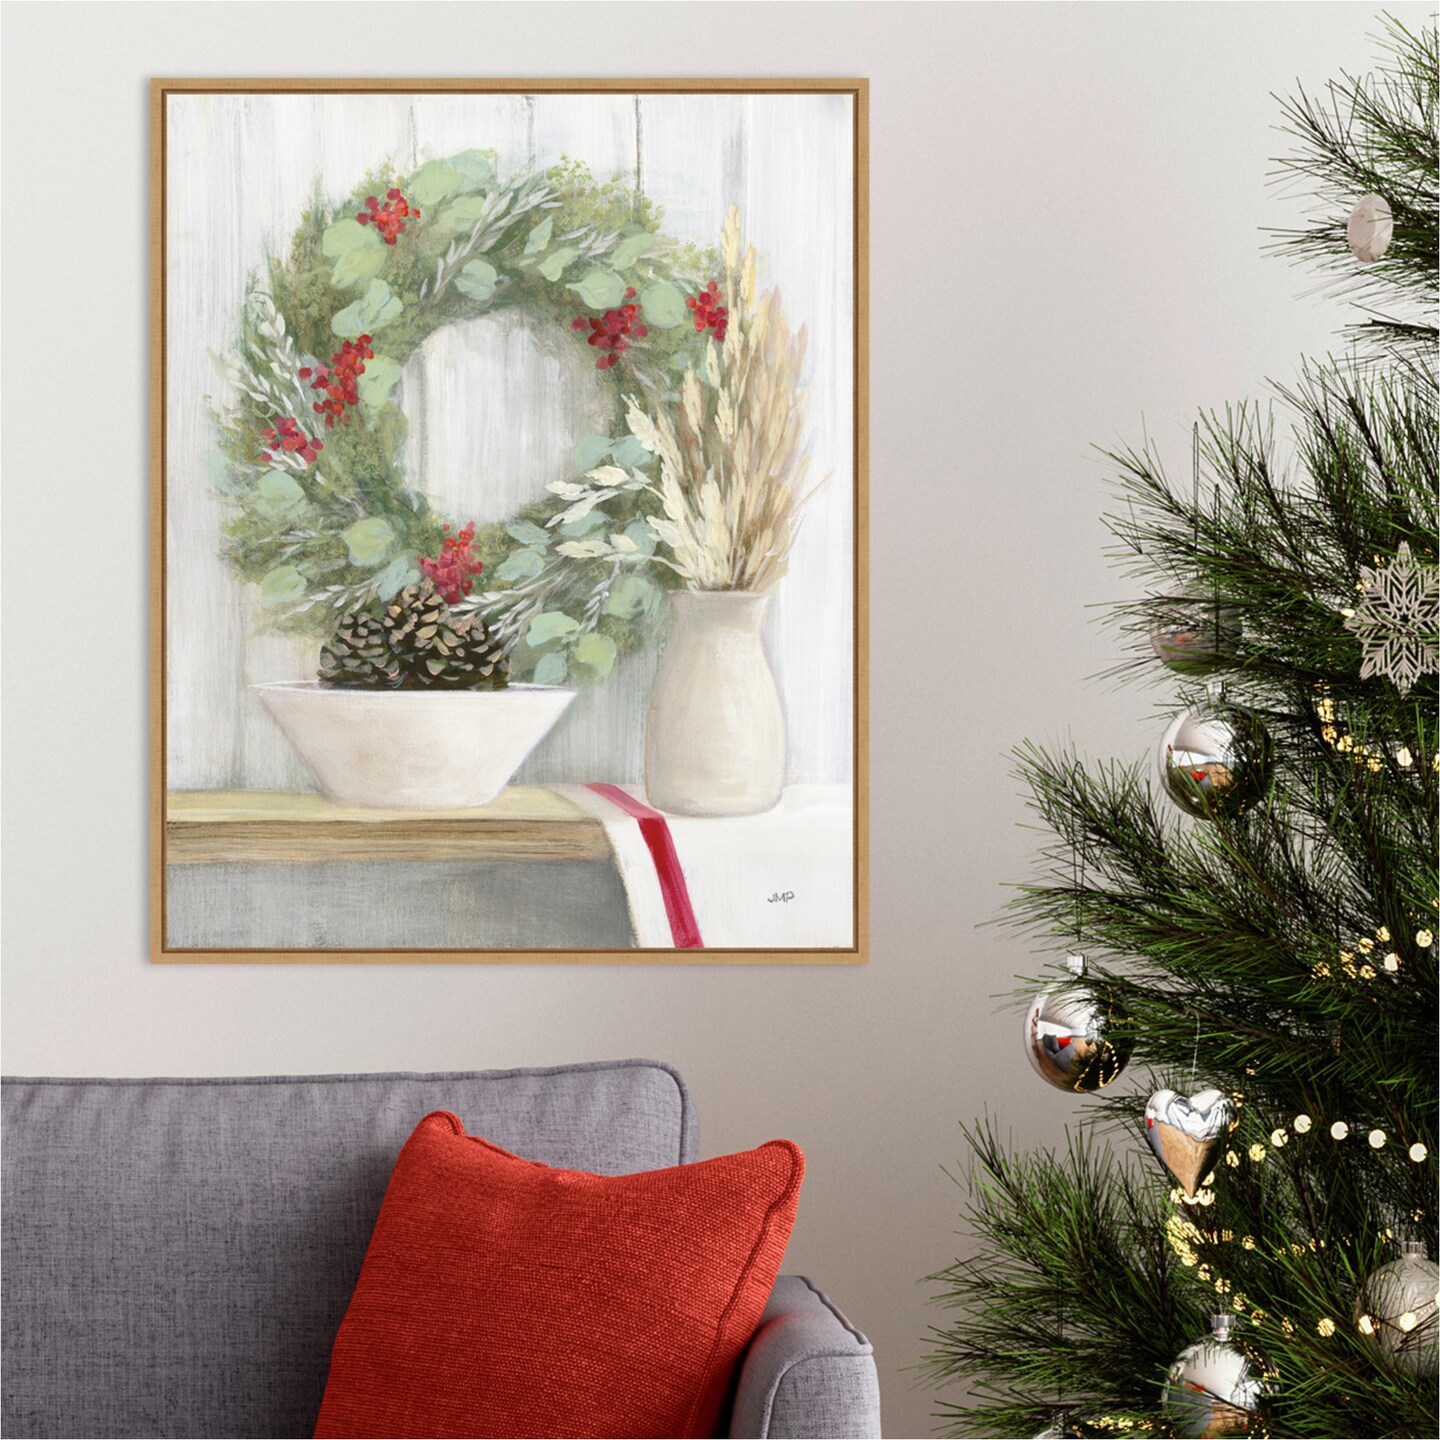 Natural Christmas I by Julia Purinton 23-in. W x 28-in. H. Canvas Wall Art Print Framed in Natural